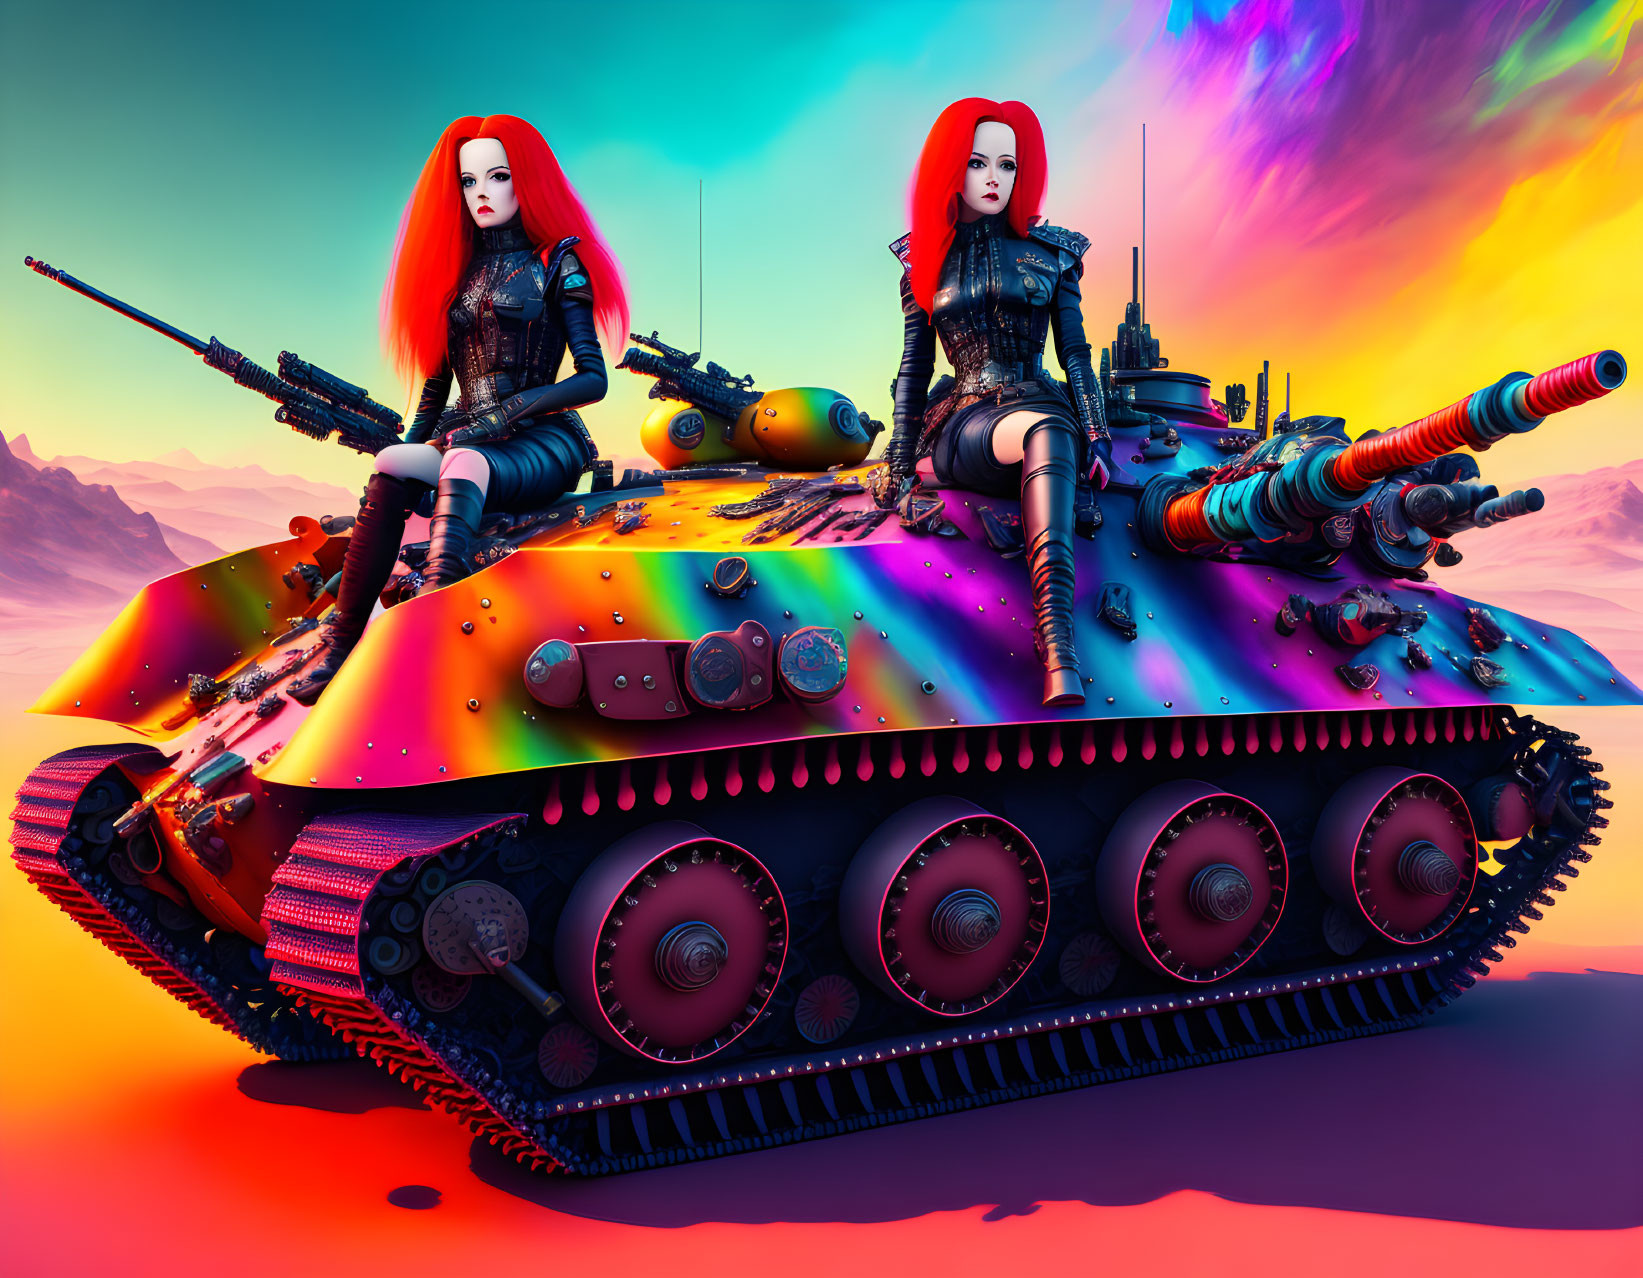 Two Red-Haired Women in Futuristic Armor on Colorful Tank